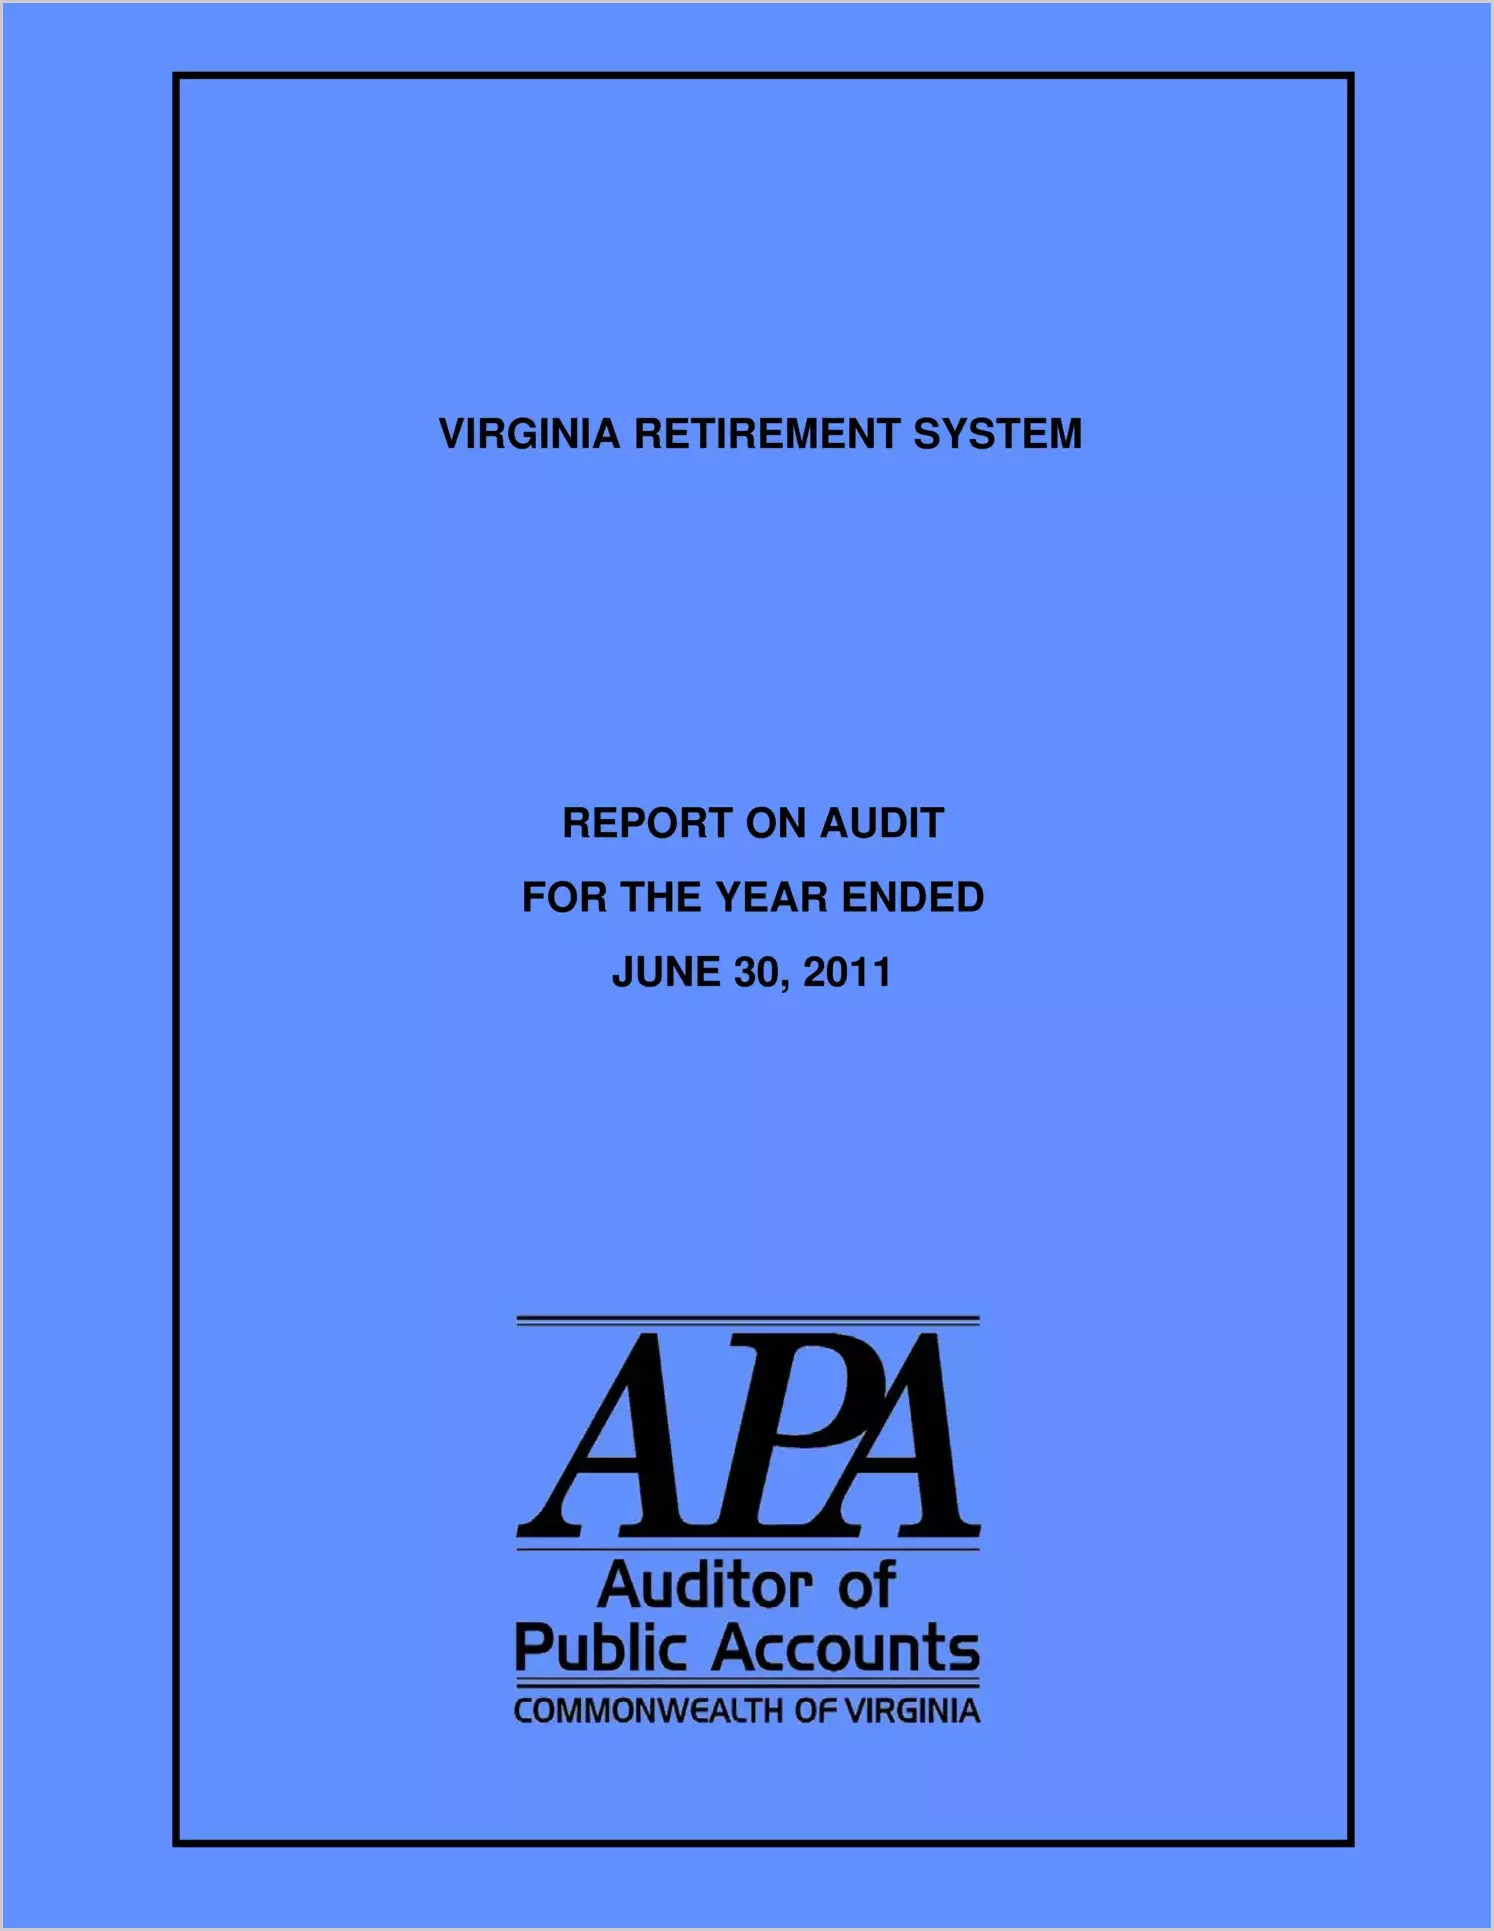 Virginia Retirement System for the year ended June 30, 2011